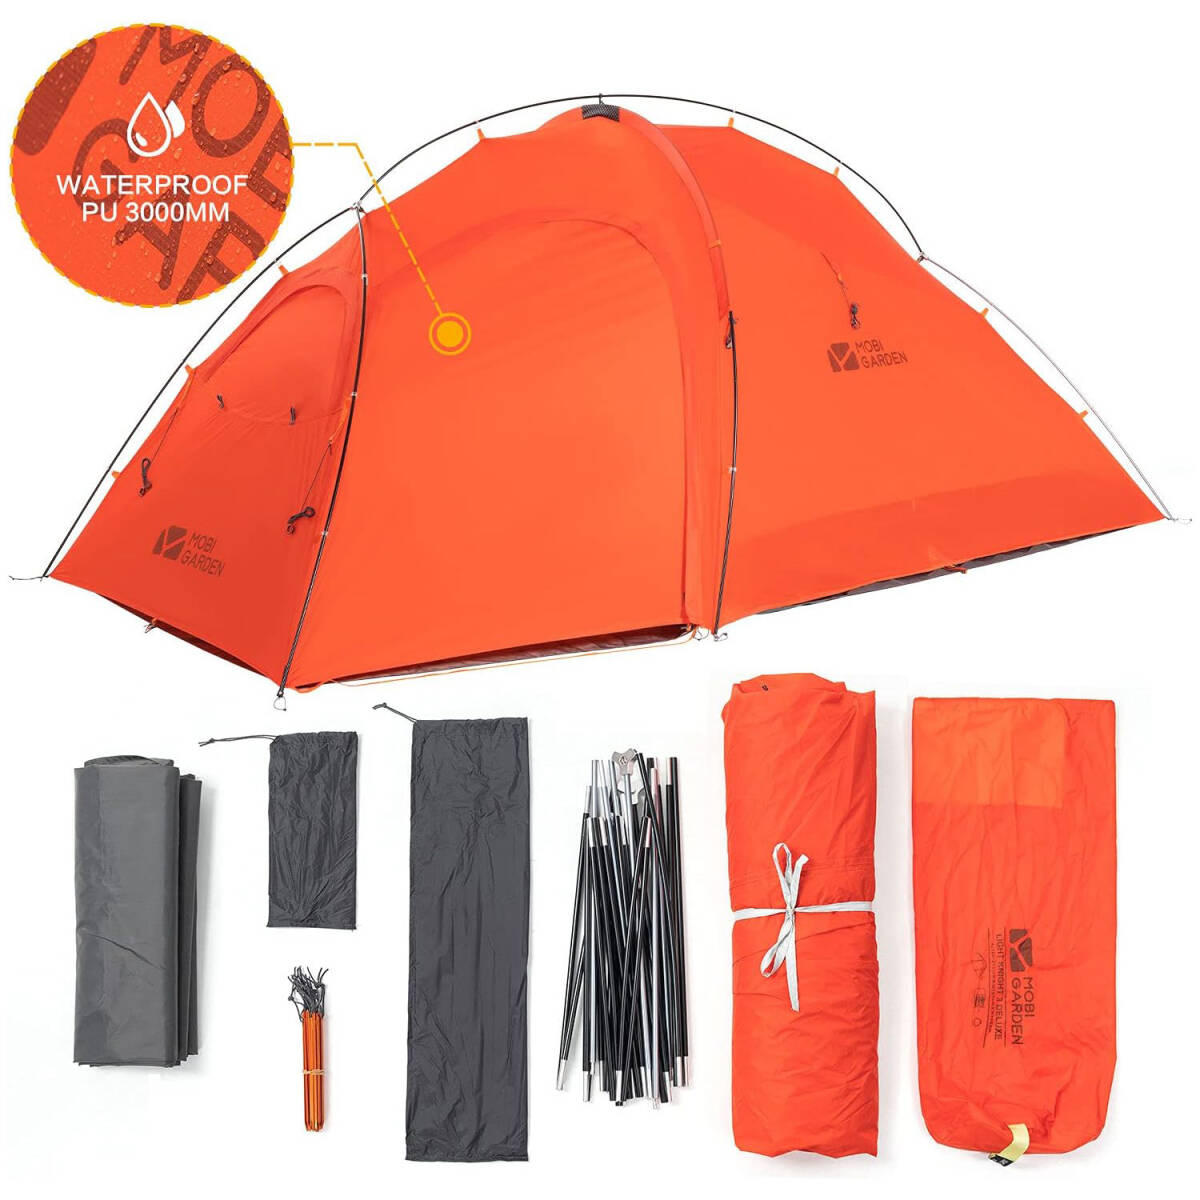 MOBI GARDEN(モビガーデン) LIGHT KNIGHT 3 DELUXE TENT キャンプテント 1~3人用 バックパッキングテント 防水 軽量 コンパクト オレンジ_画像6